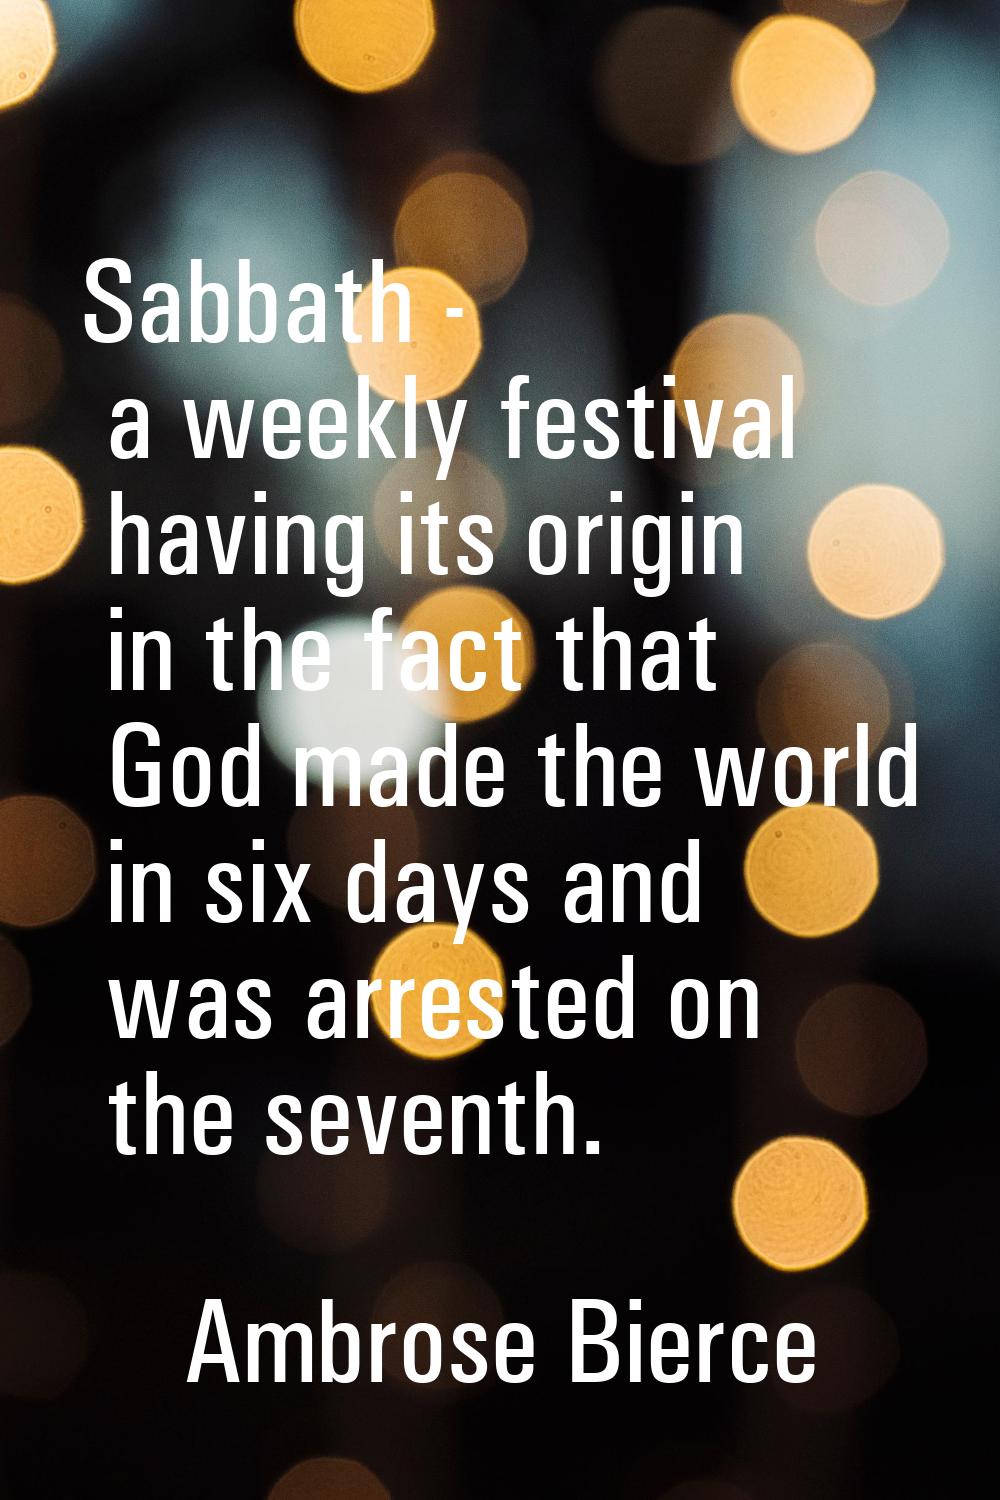 Sabbath - a weekly festival having its origin in the fact that God made the world in six days and w